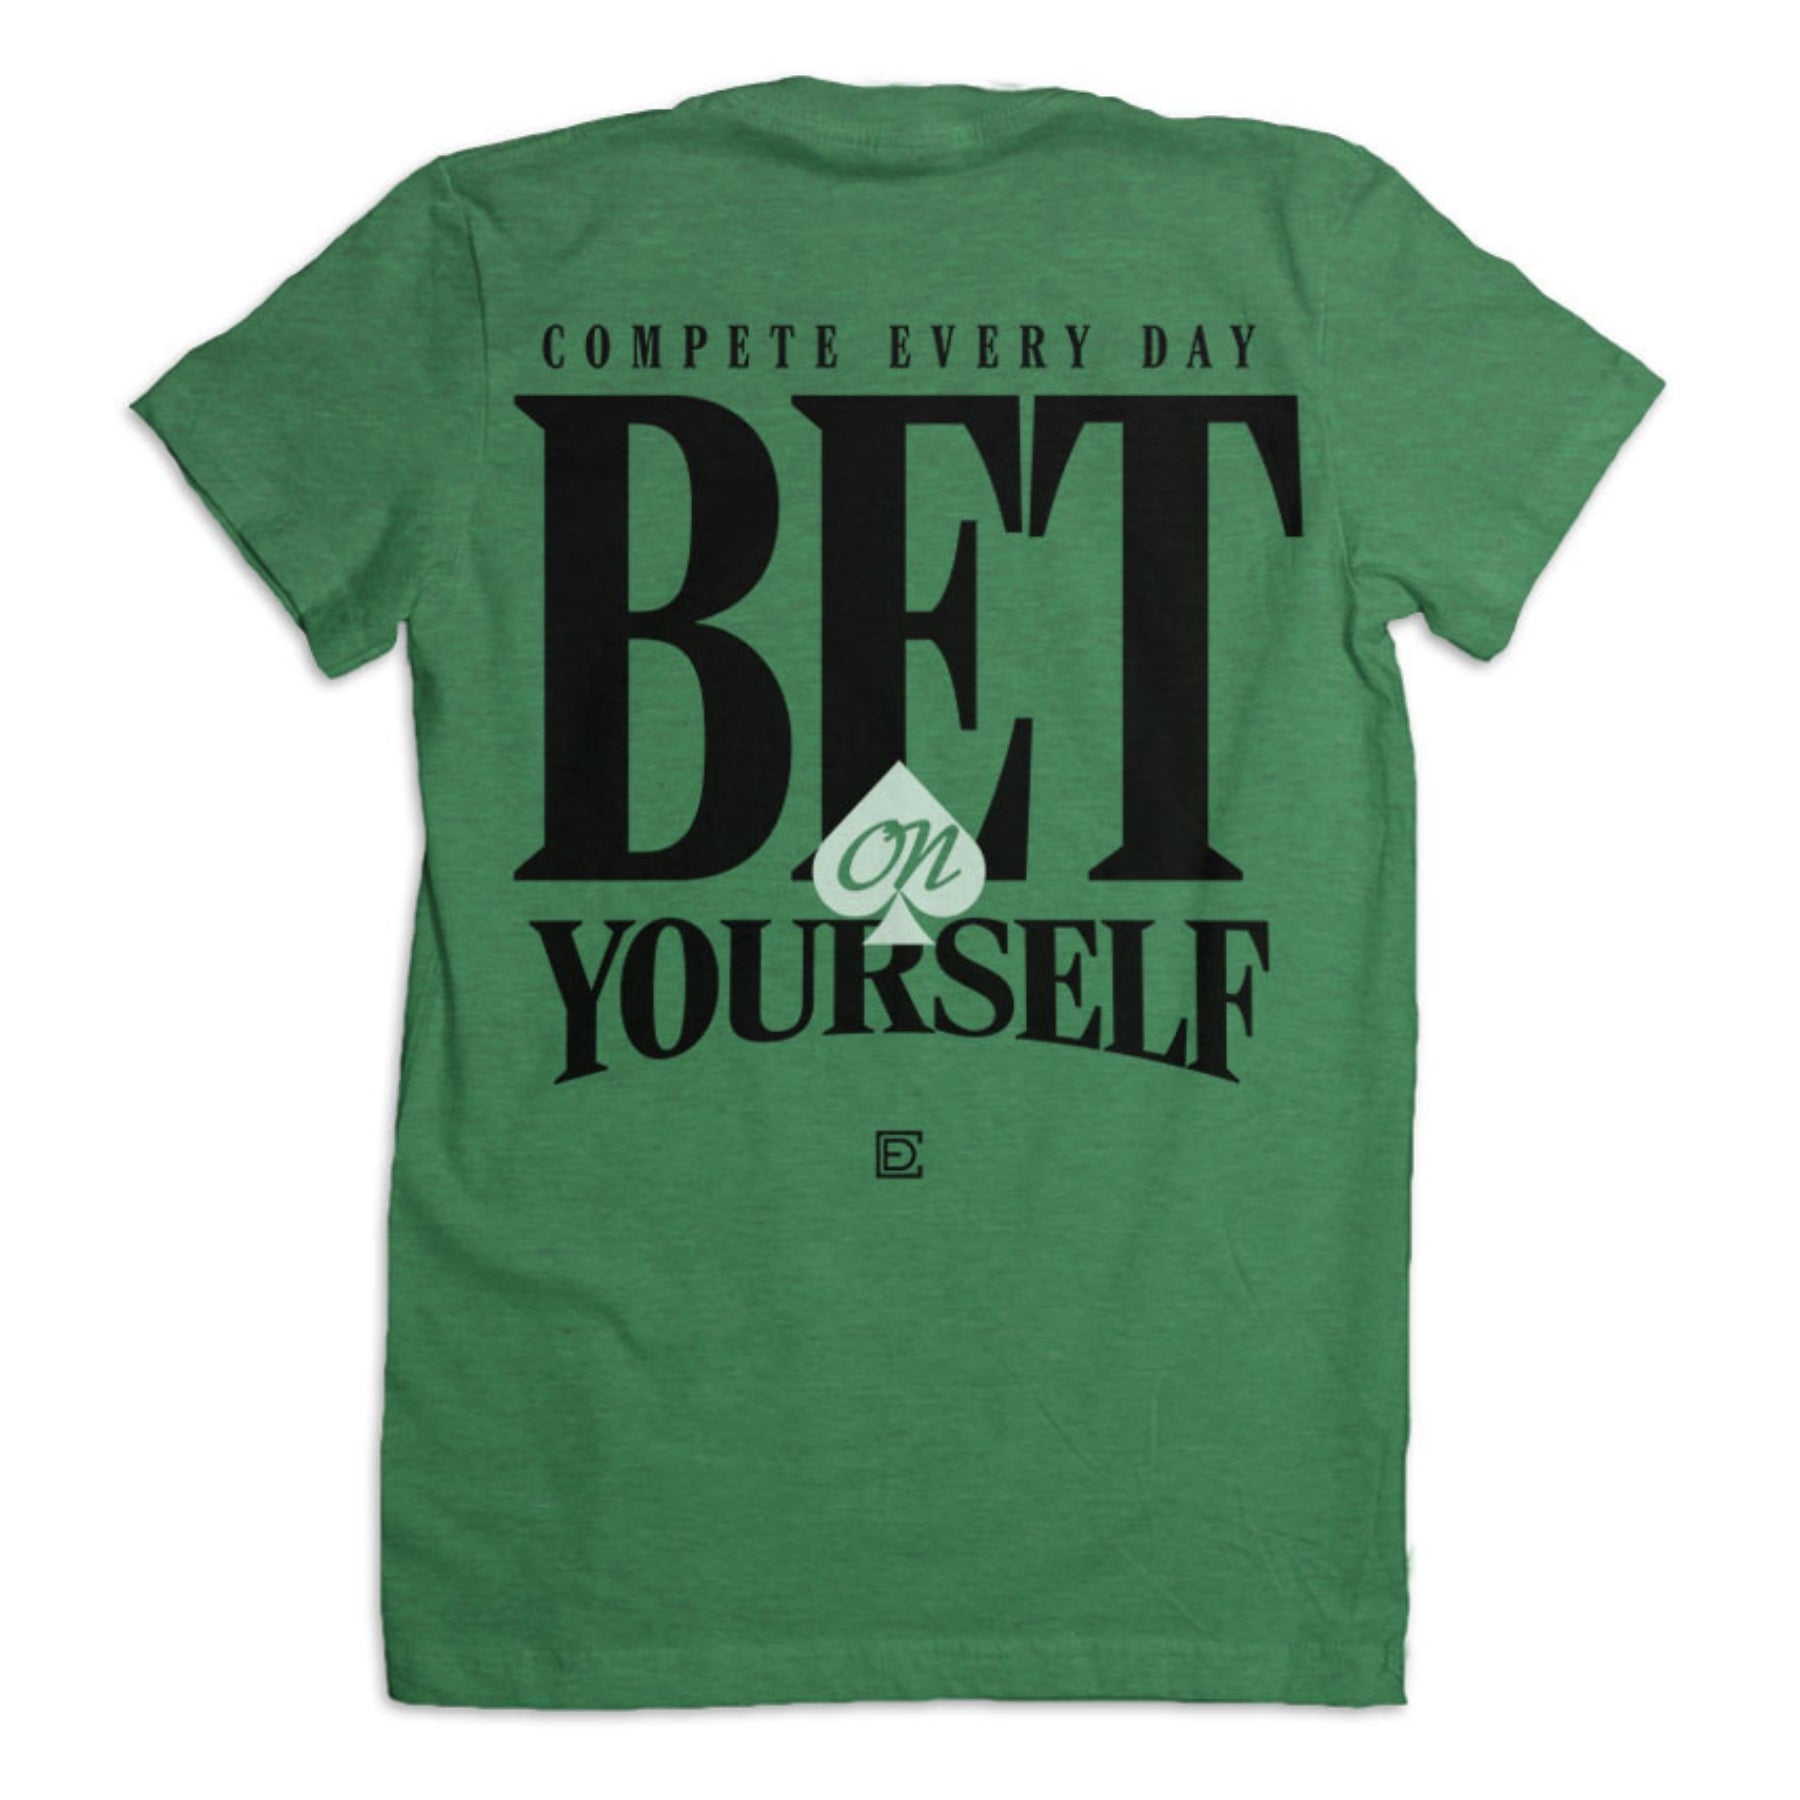 Bet On Yourself (Womens)